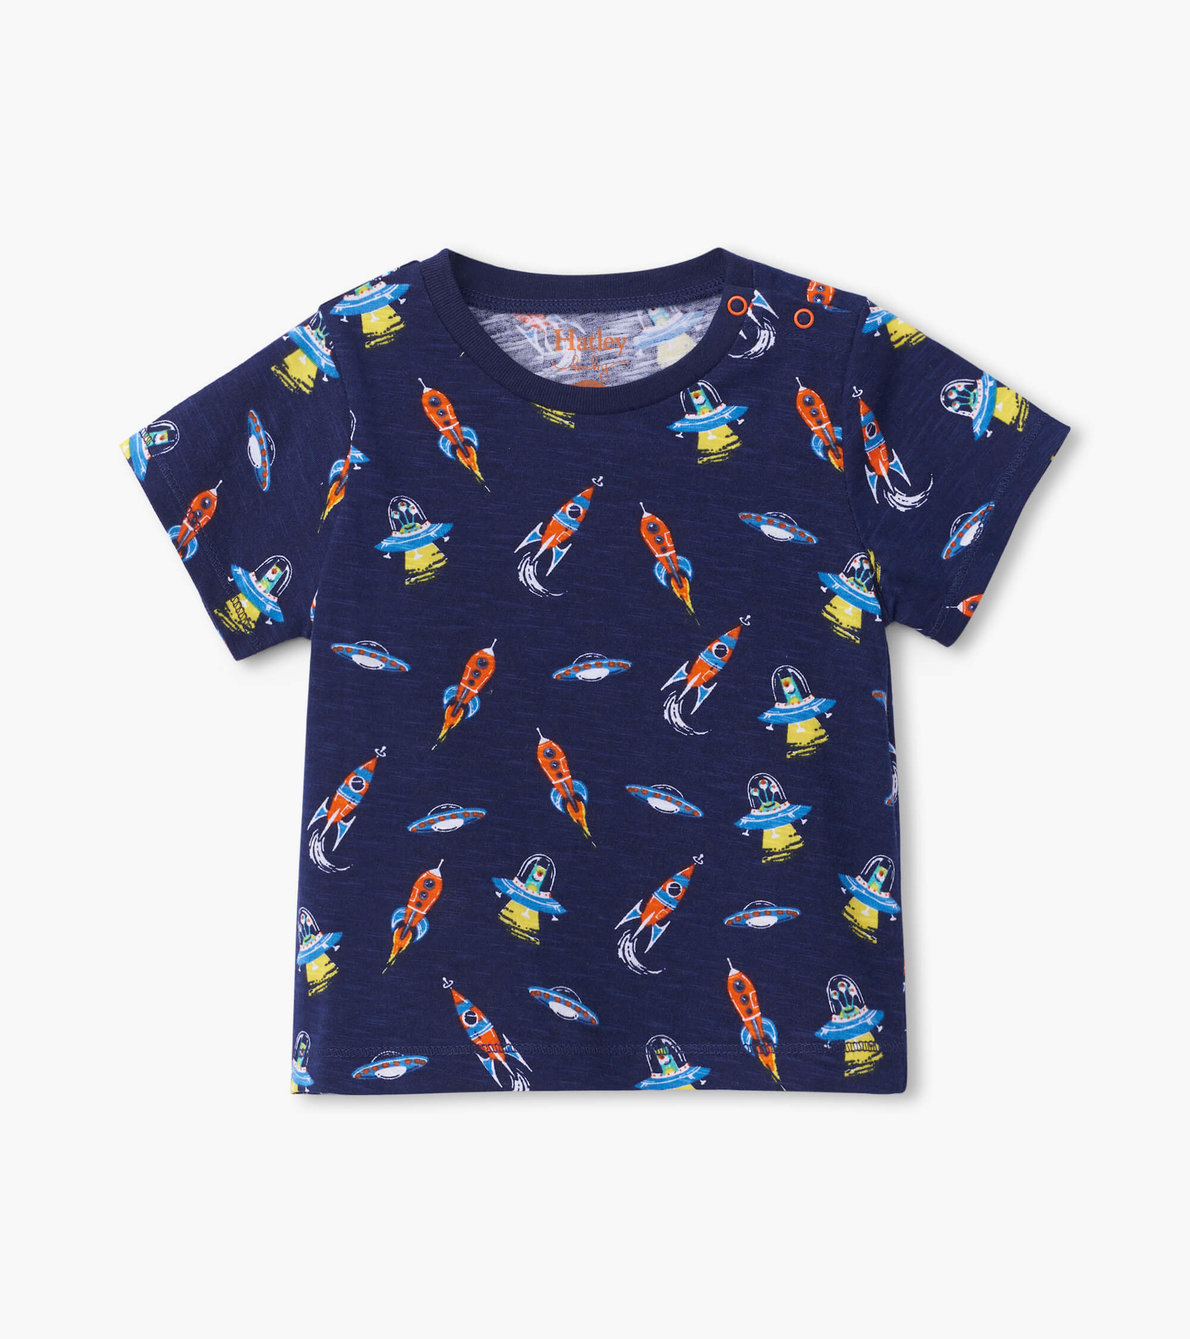 View larger image of Retro Rockets Baby Graphic Tee